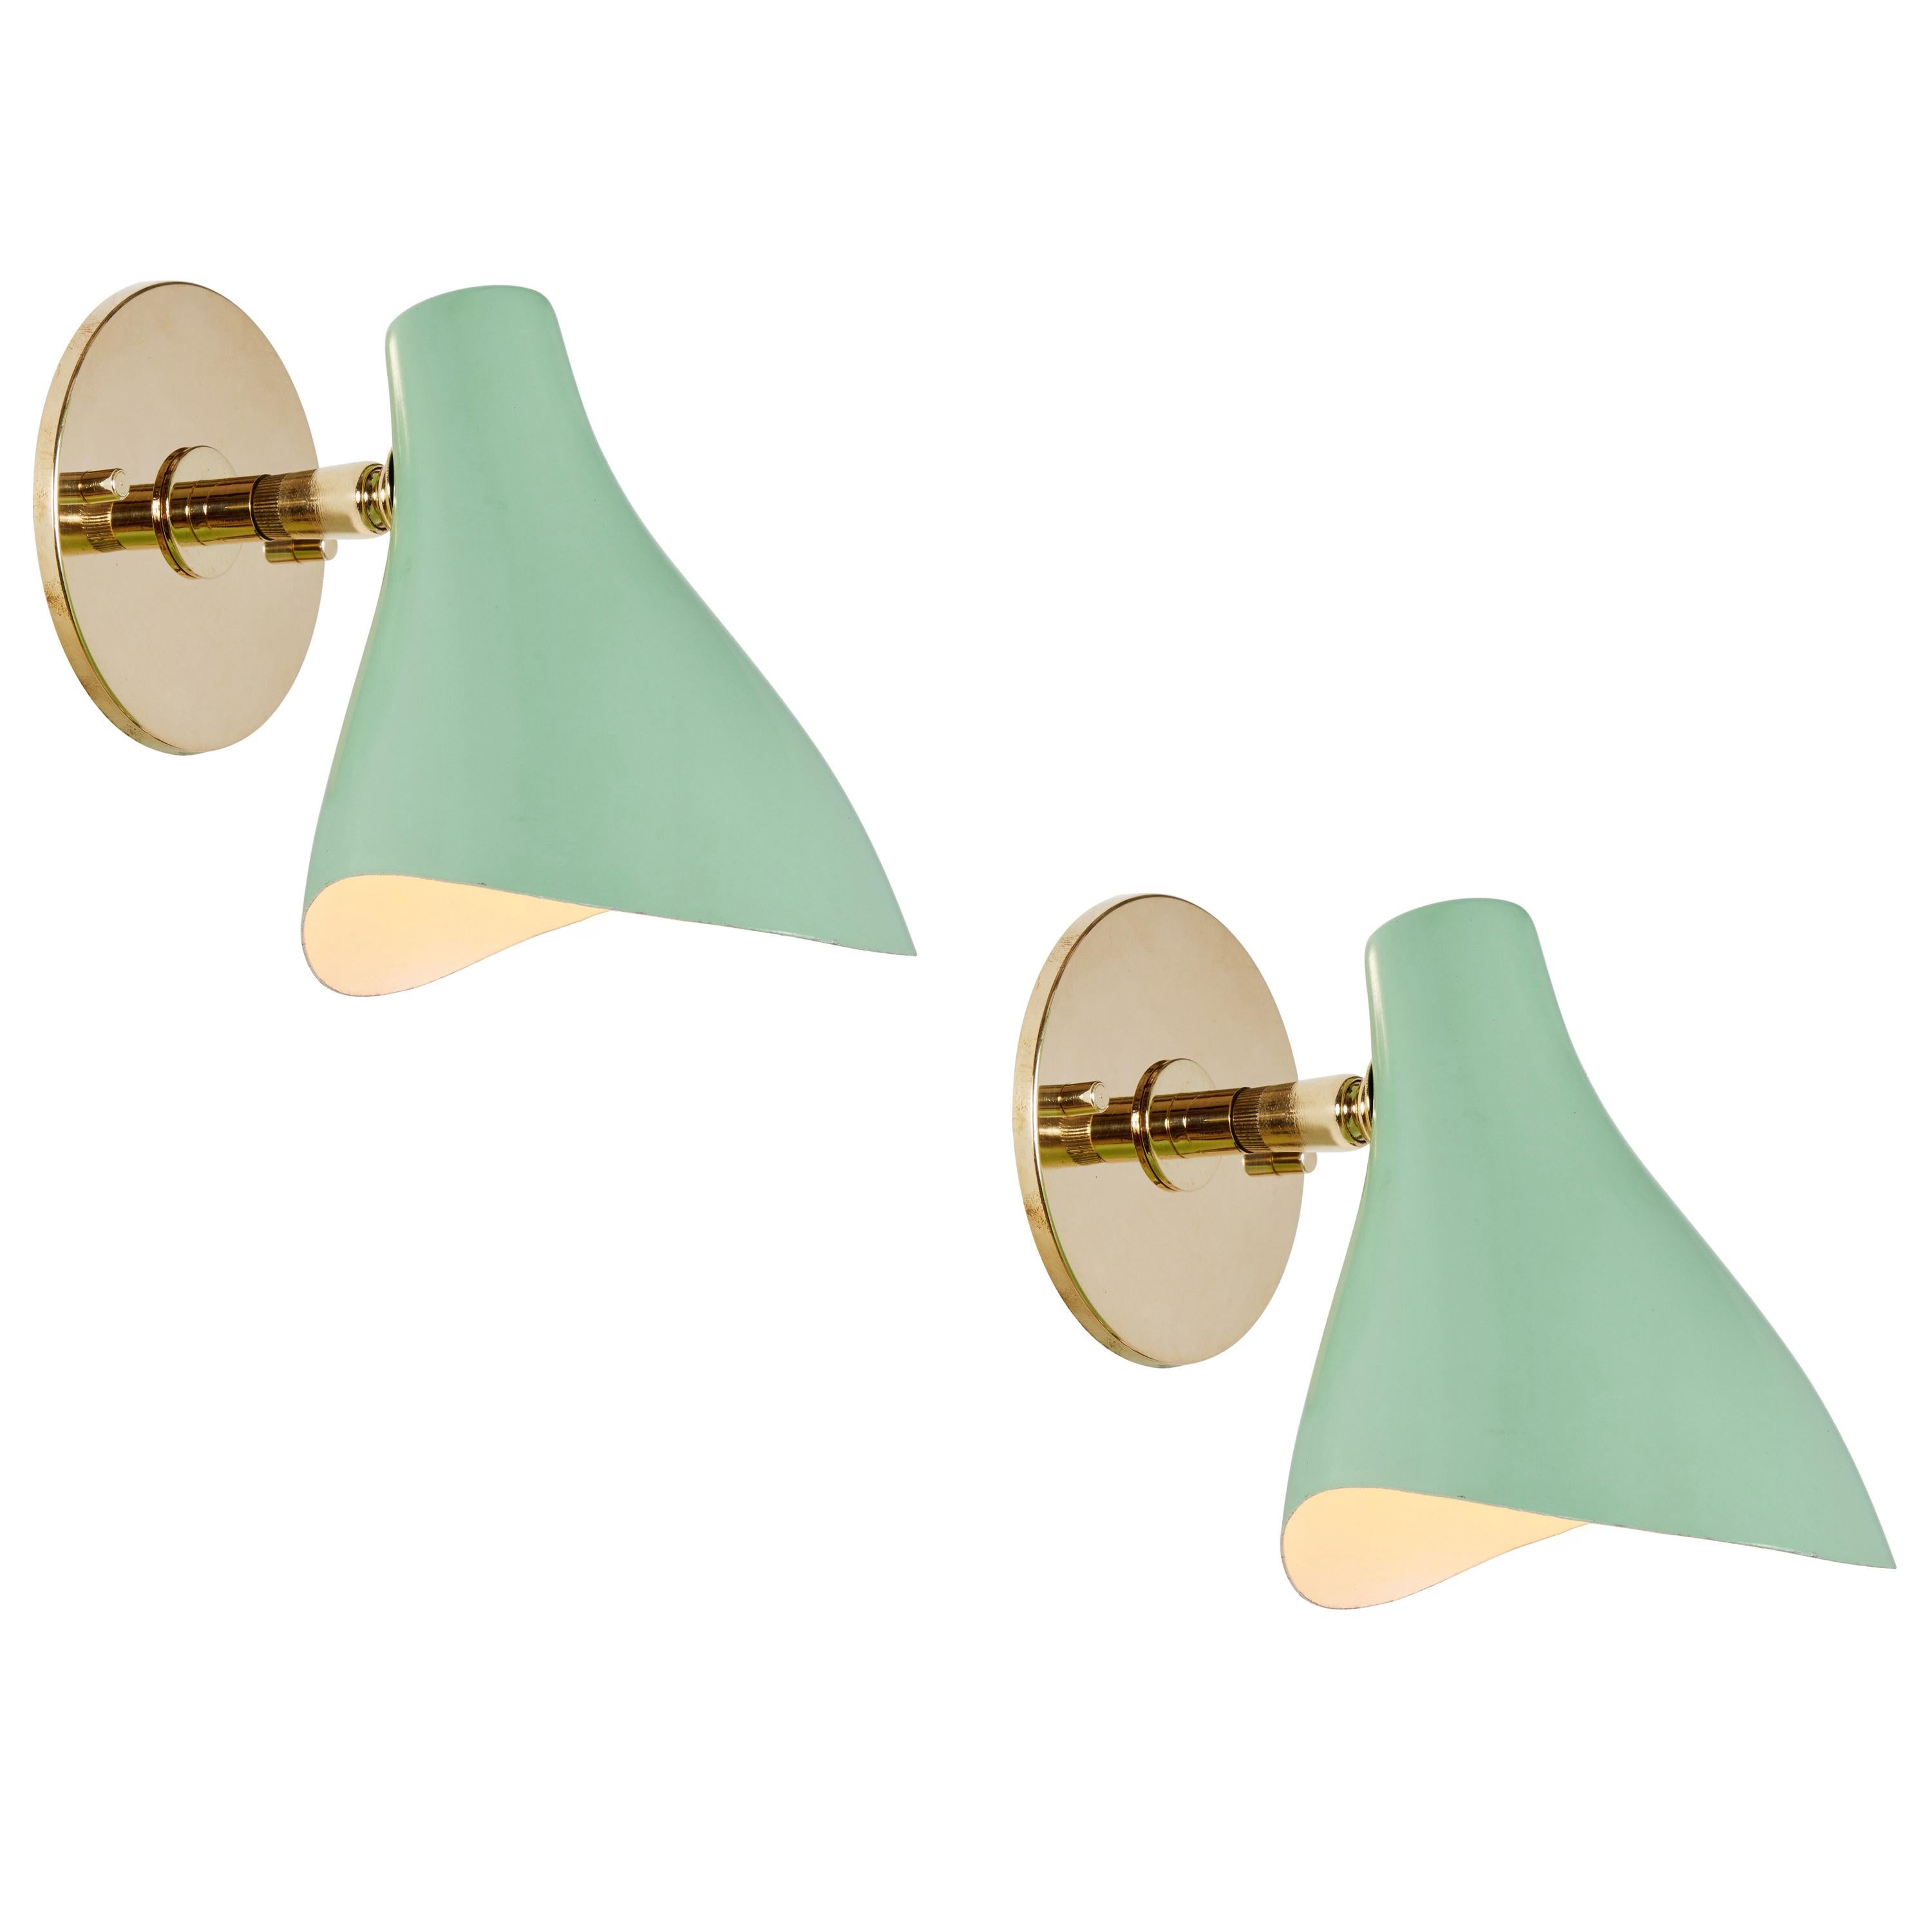 Pair of Gino Sarfatti Model #10 Sconces in Green for Arteluce